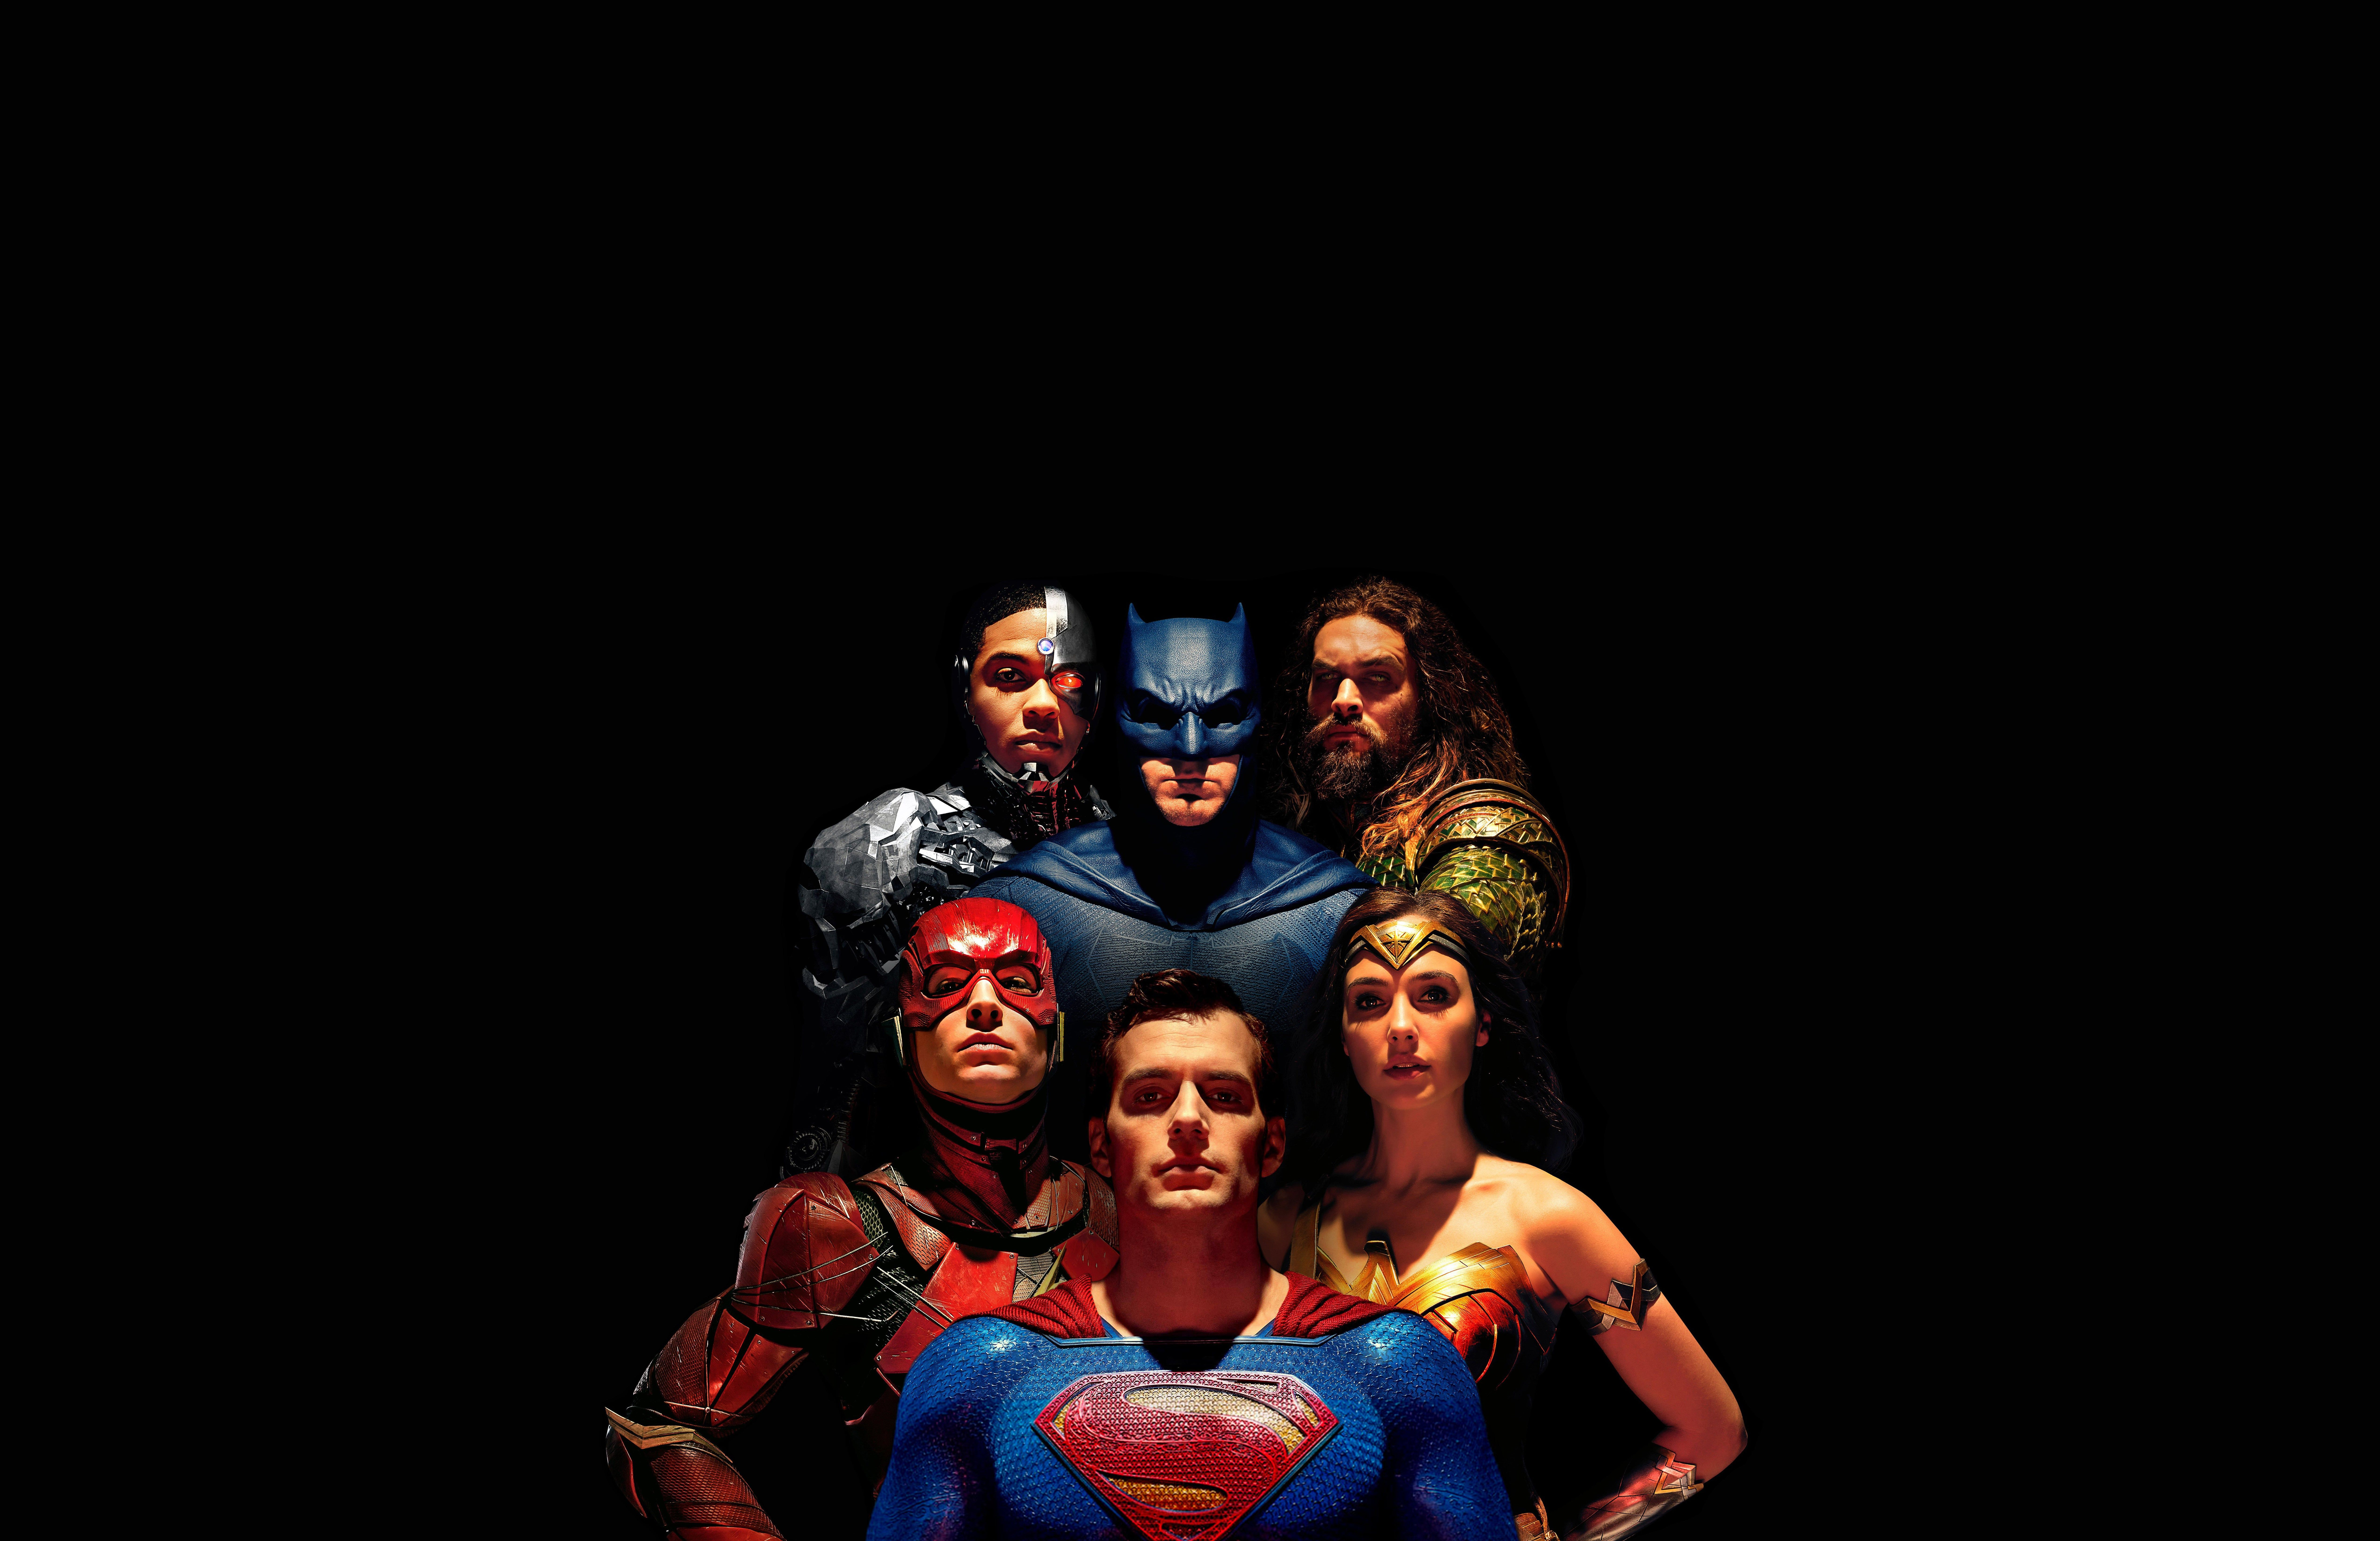 PHOTOSHOP: Ultra High Res Justice League Wallpaper For Any Phone Size, Edited To Focus More On Superman (More Variations In The Comments), DC_Cinematic